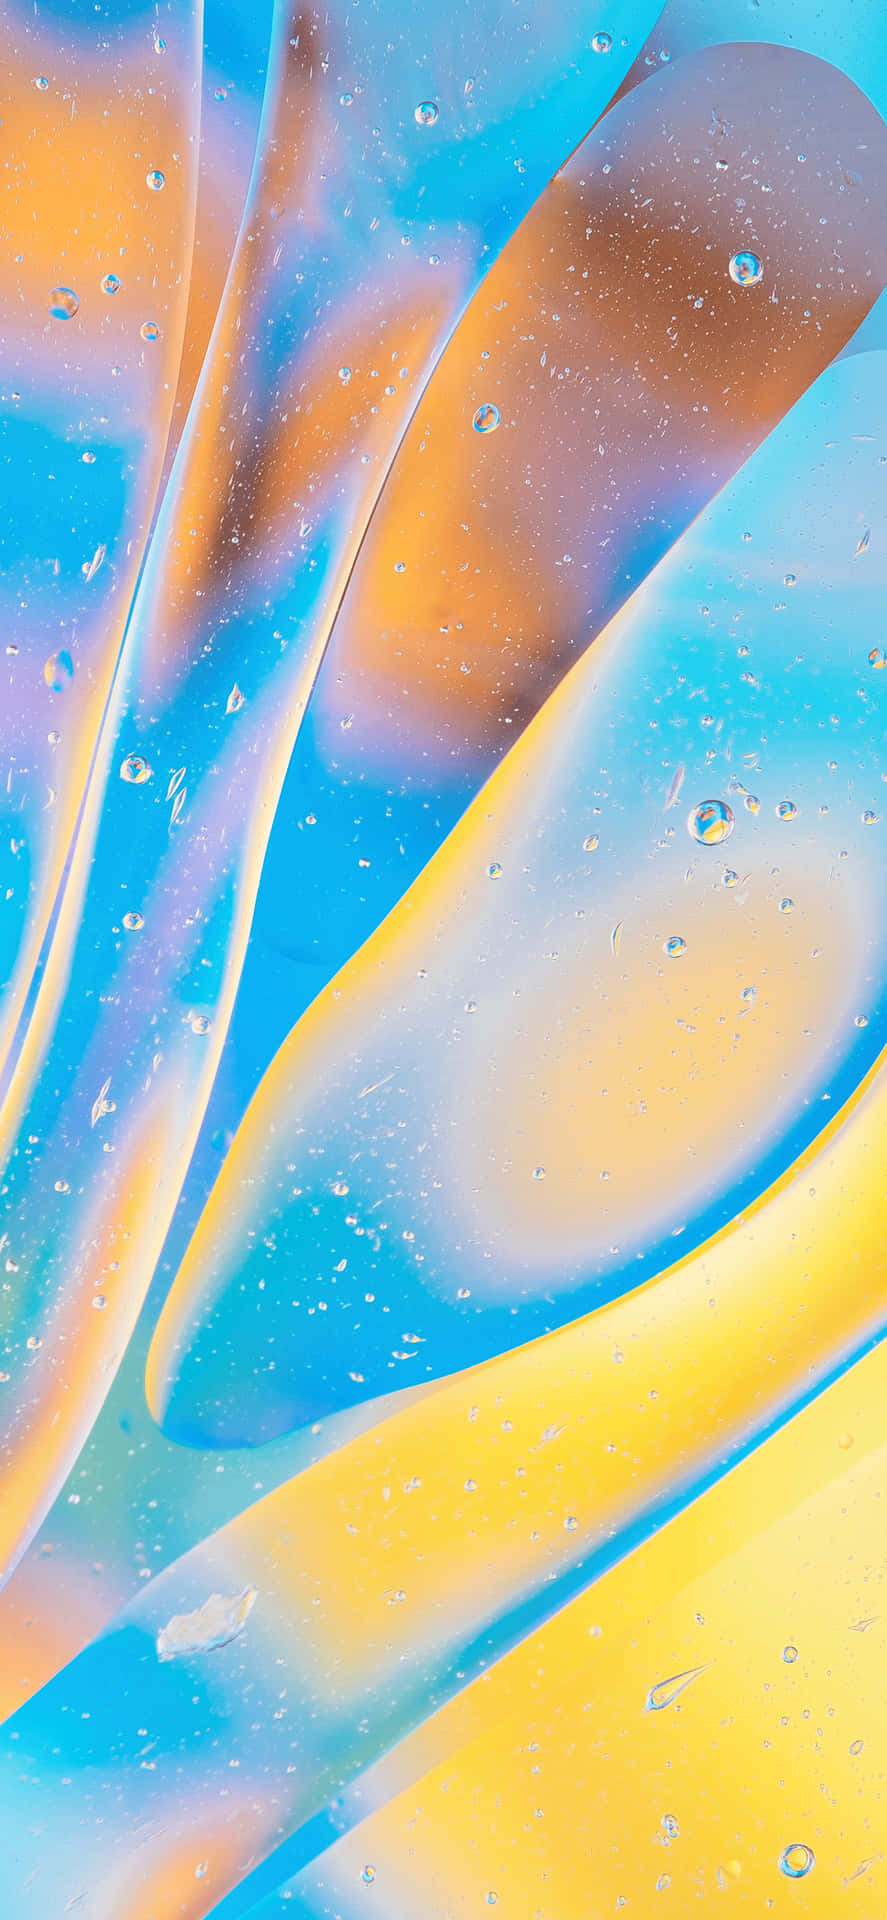 Iphone X Abstract Light Blue And Yellow Wallpaper